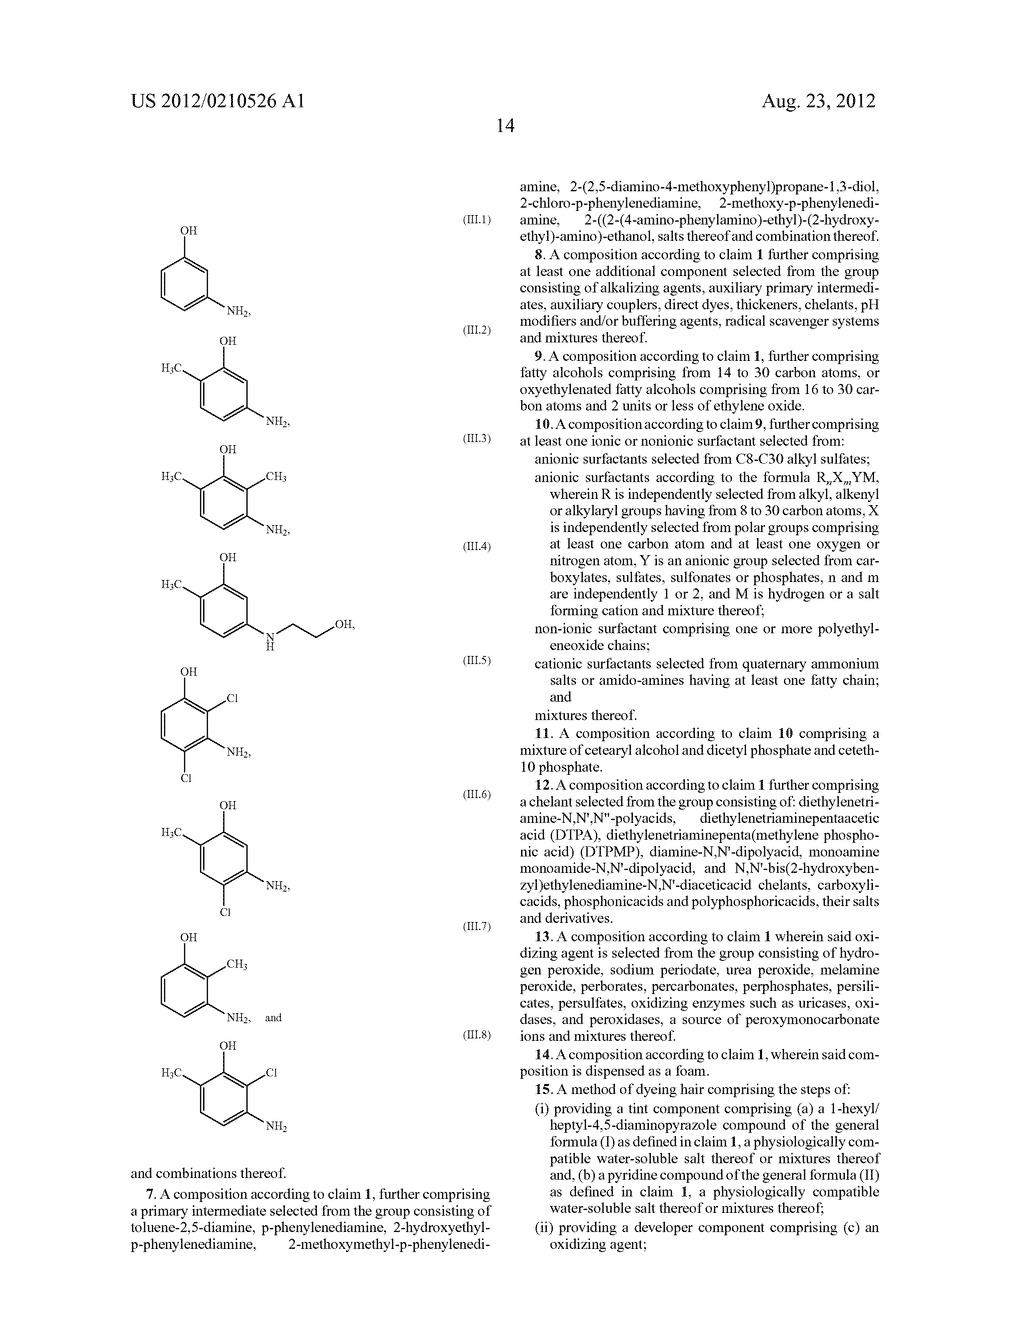 Oxidative Dyeing Compositions Comprising an     1-Hexyl/Heptyl-4,5-diaminopyrazole and a Pyridine and Derivatives Thereof - diagram, schematic, and image 16